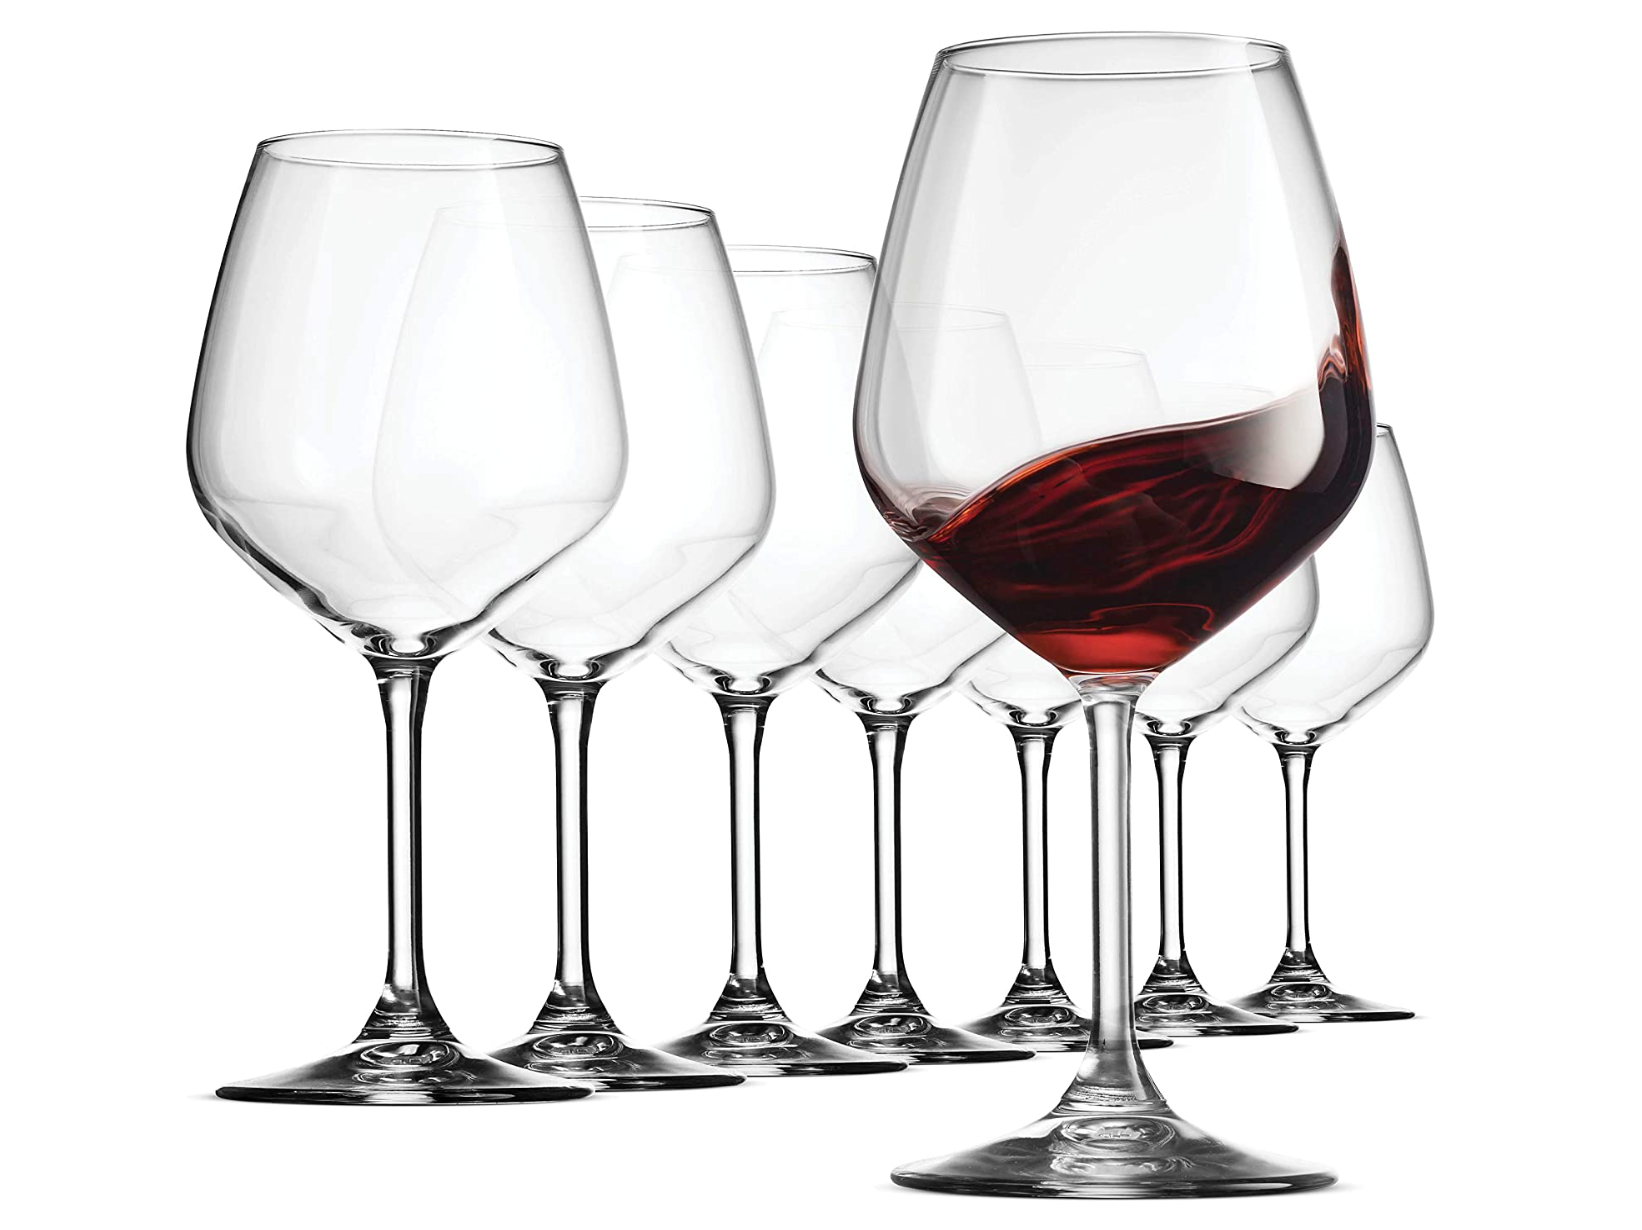 Paksh Novelty Italian Red Wine Glasses - 18 Ounce - Lead Free - Wine Glass Set of 4, Clear